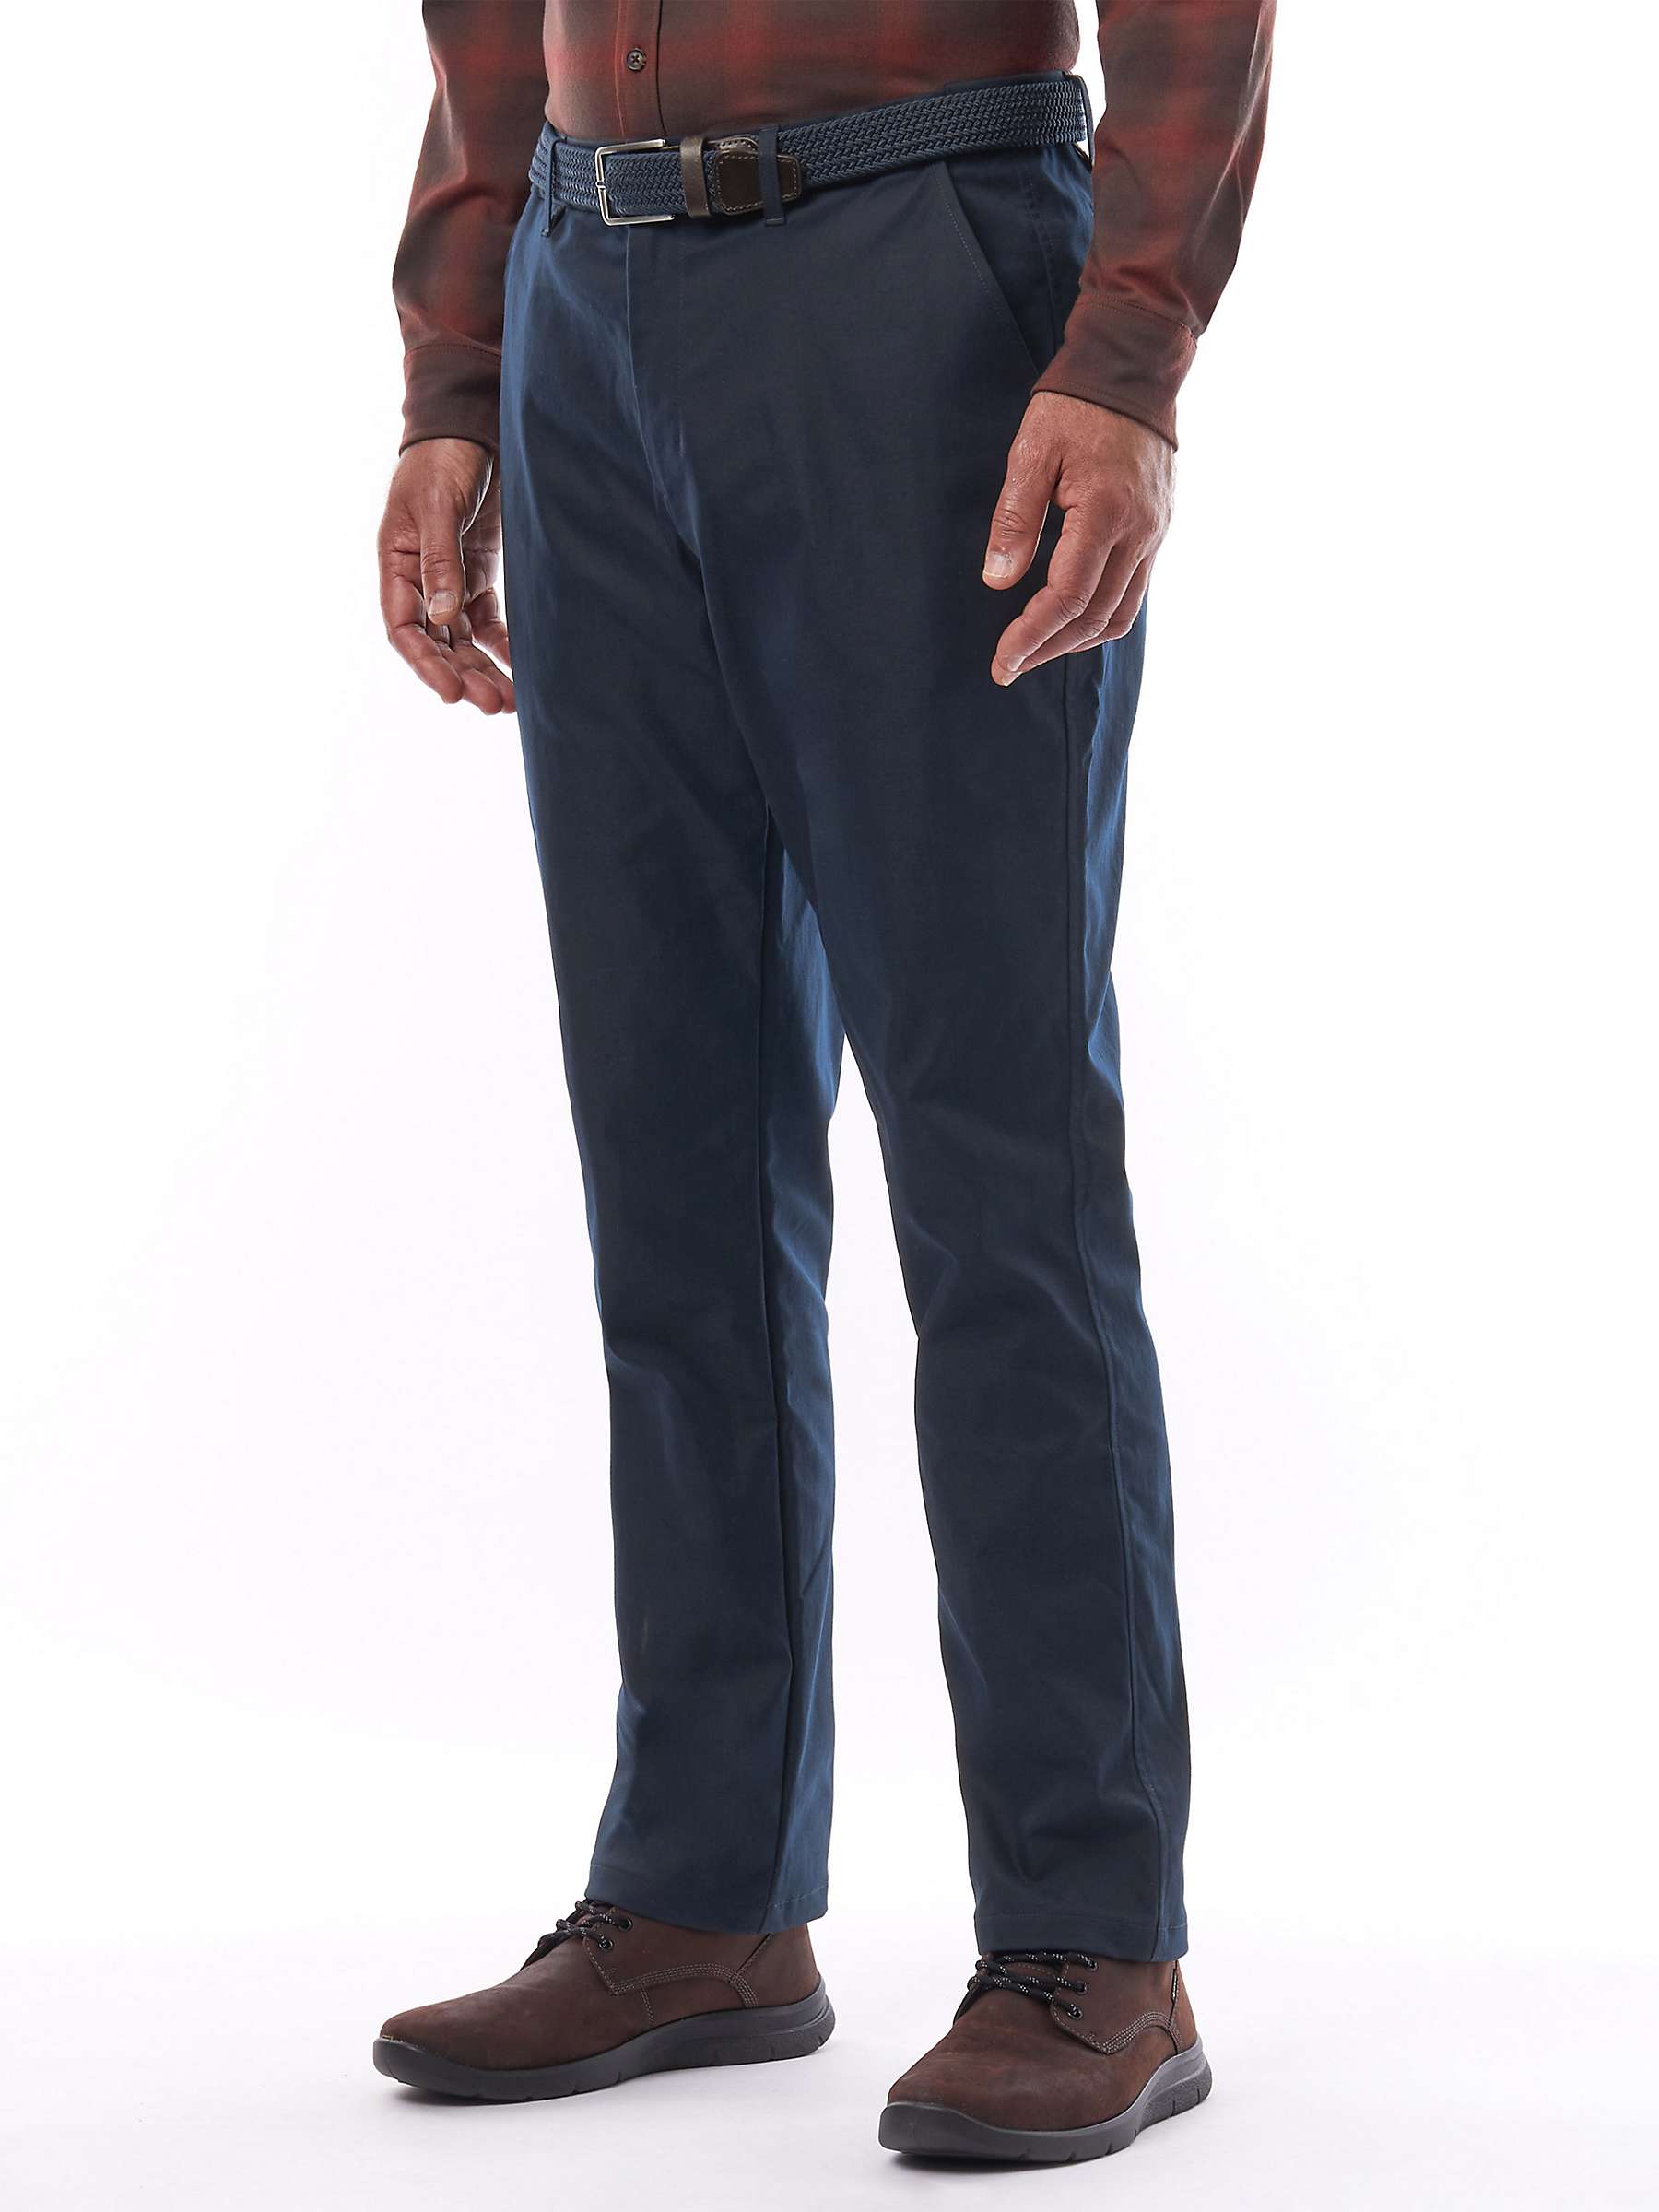 Buy Rohan Dry District Waterproof Chinos Trousers Online at johnlewis.com